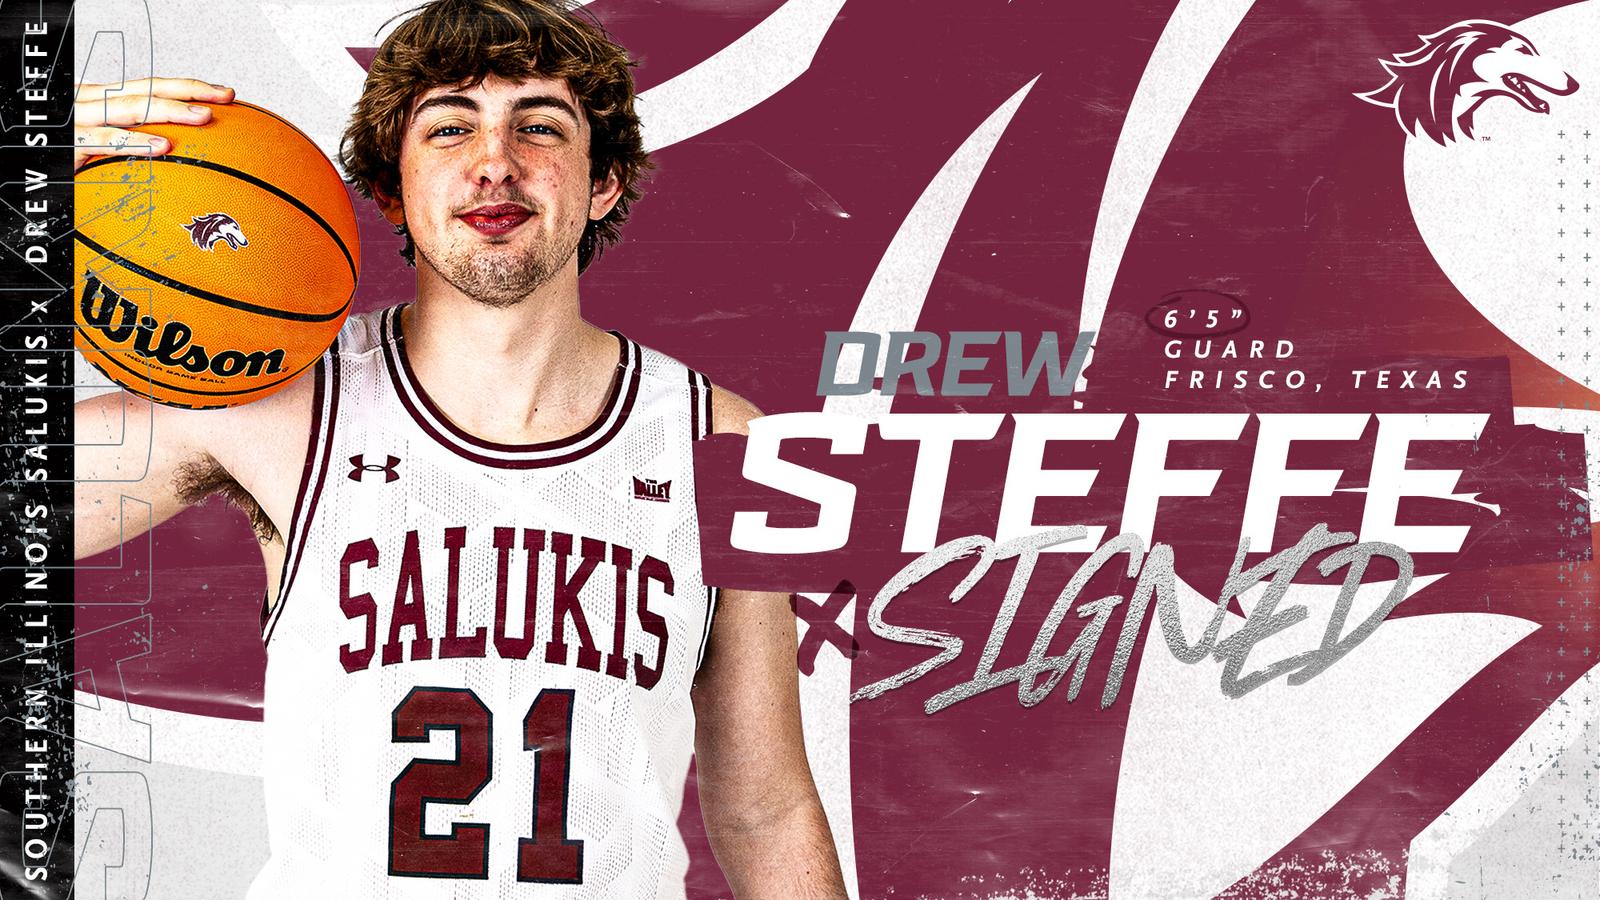 News | Salukis Ink Four Star Transfer from Texas Tech in Drew Steffe